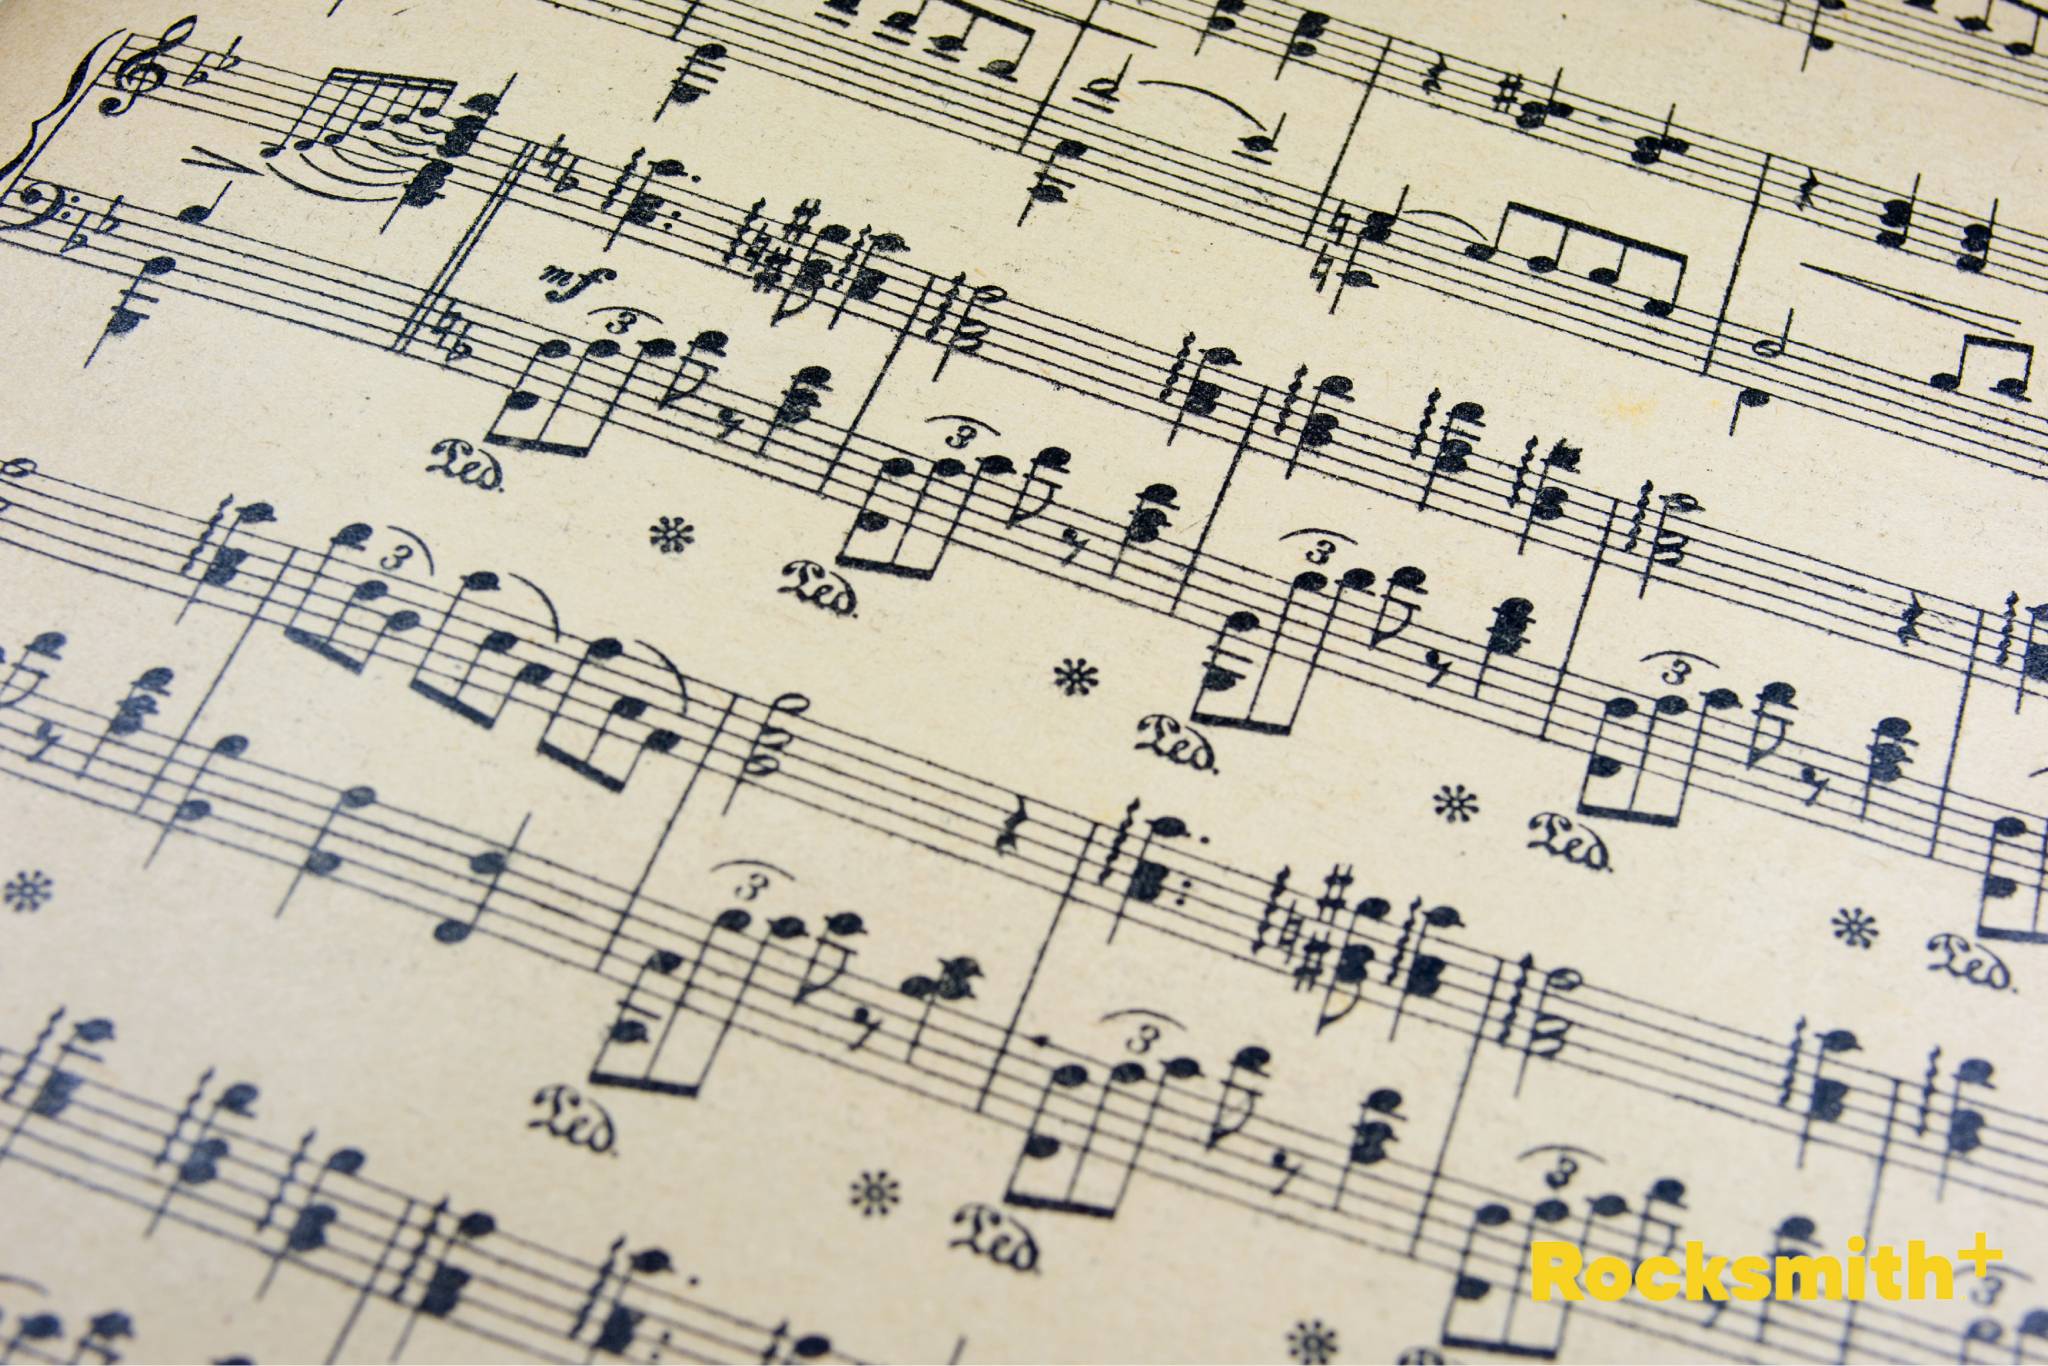 [RS+] How To Read Treble Clef Notes for Piano SEO ARTICLE - treble clef notes